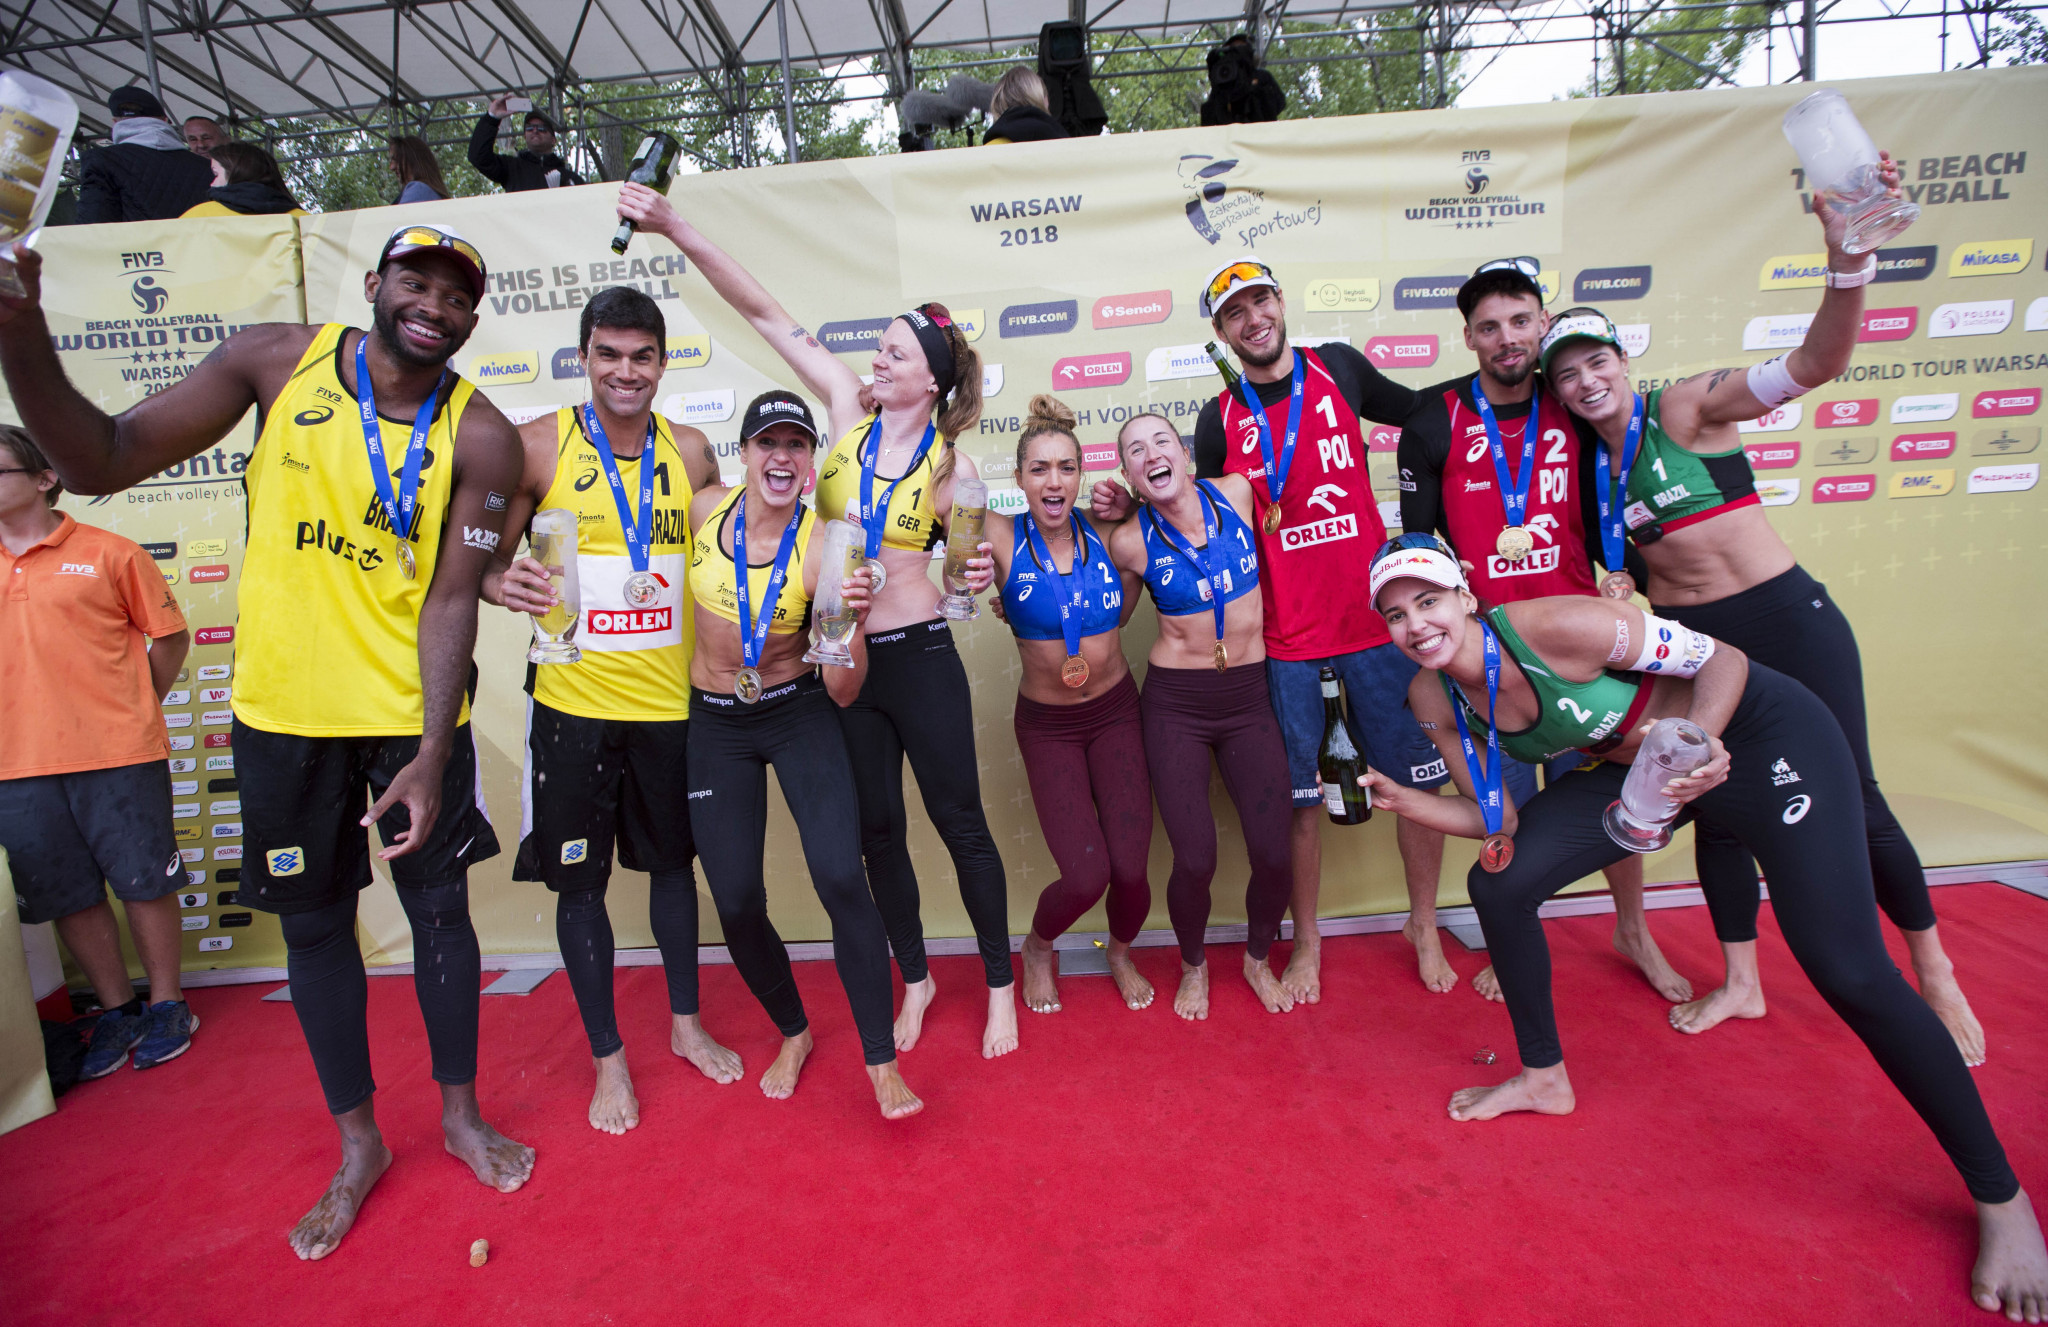 Poland's Piotr Kantor and Bartosz Łosiak and Canada's Heather Bansley and Brandie Wilkerson triumphed at last year's edition of the event in Warsaw ©FIVB